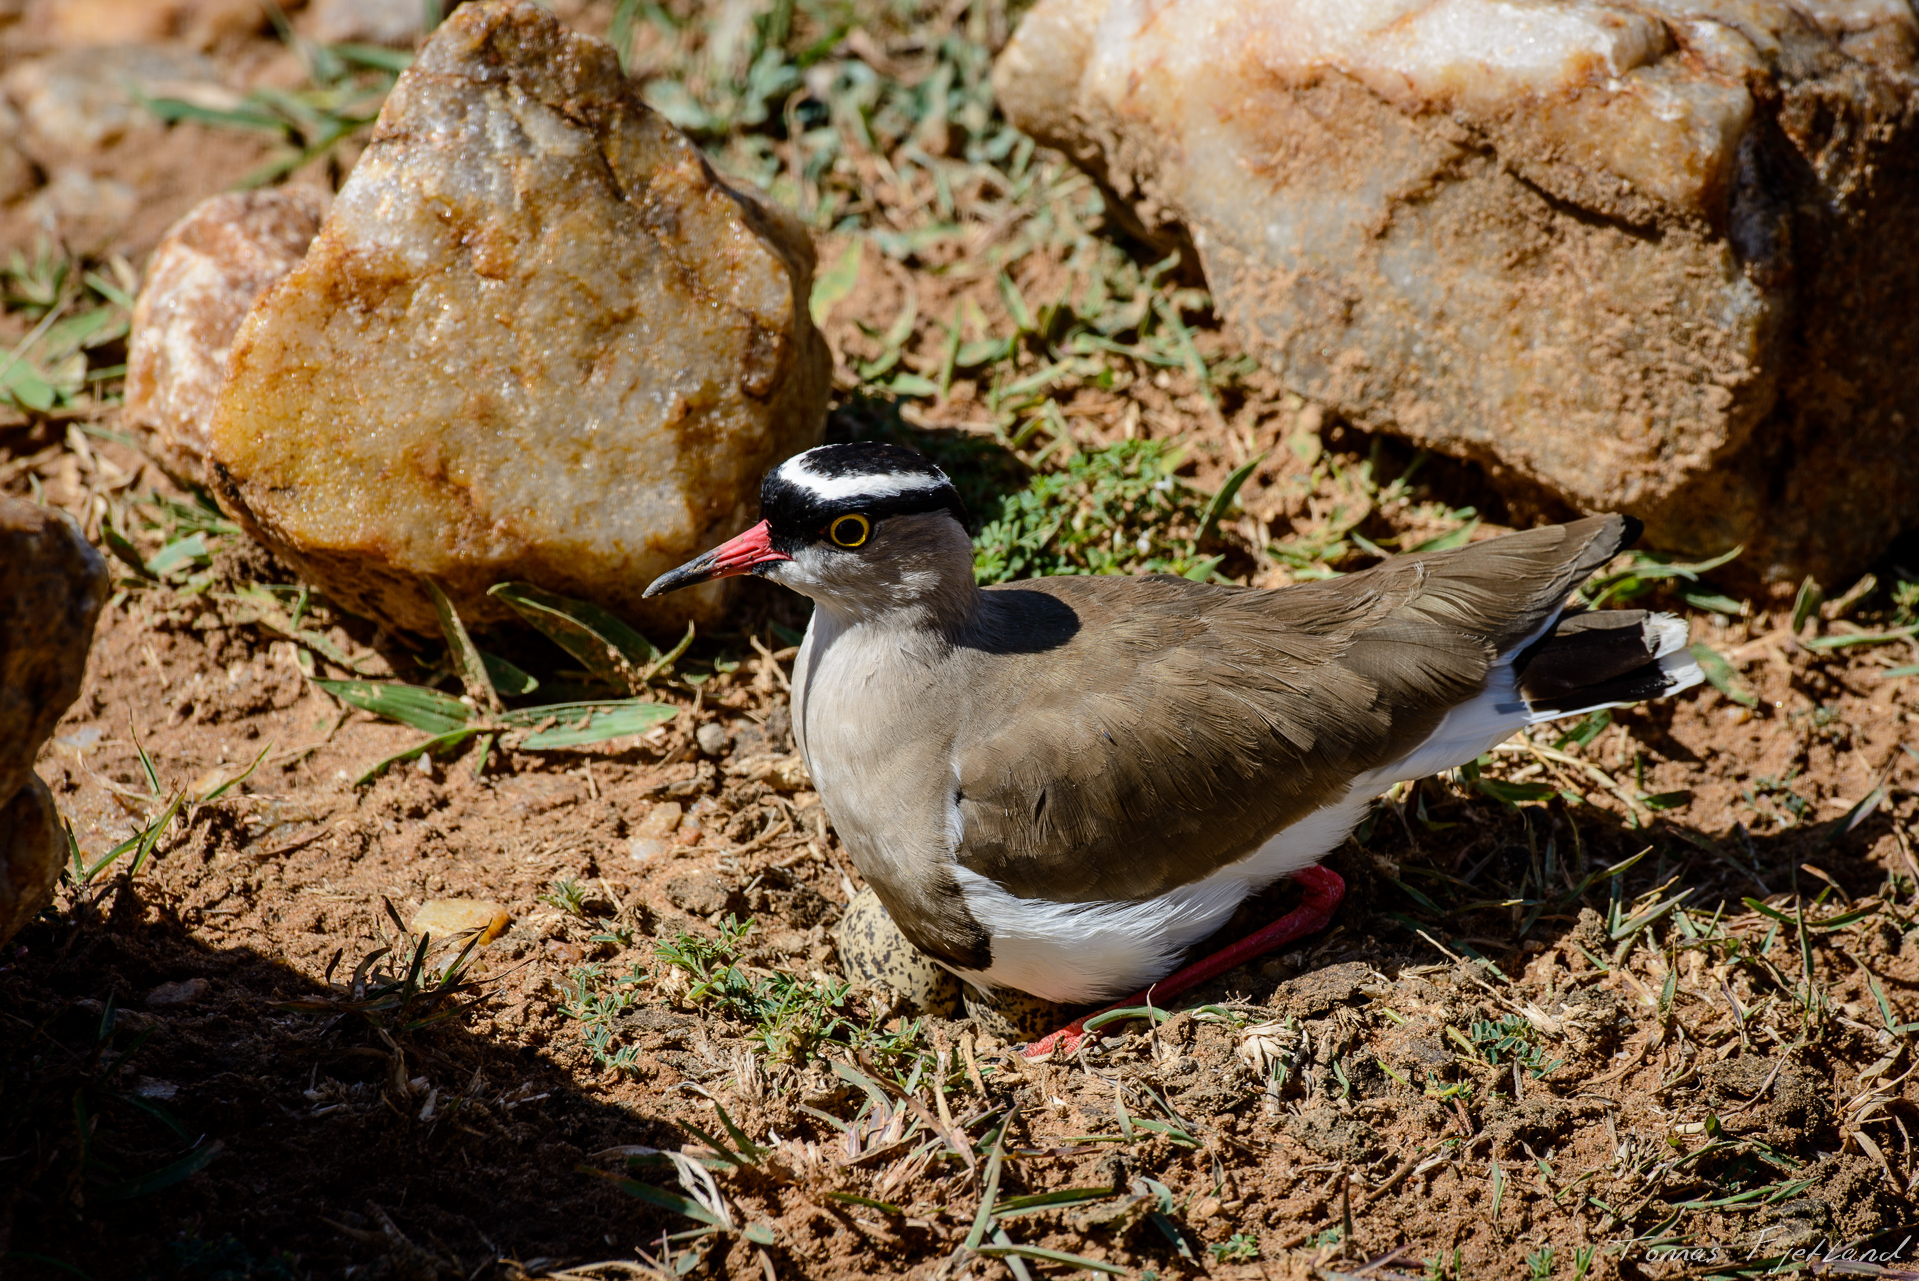 This Crowned Lapwing had decided to lay its eggs in the middle of a 4x4 path, but some helpful Maasai had surrounded her with rocks to alert drivers and make them drive around